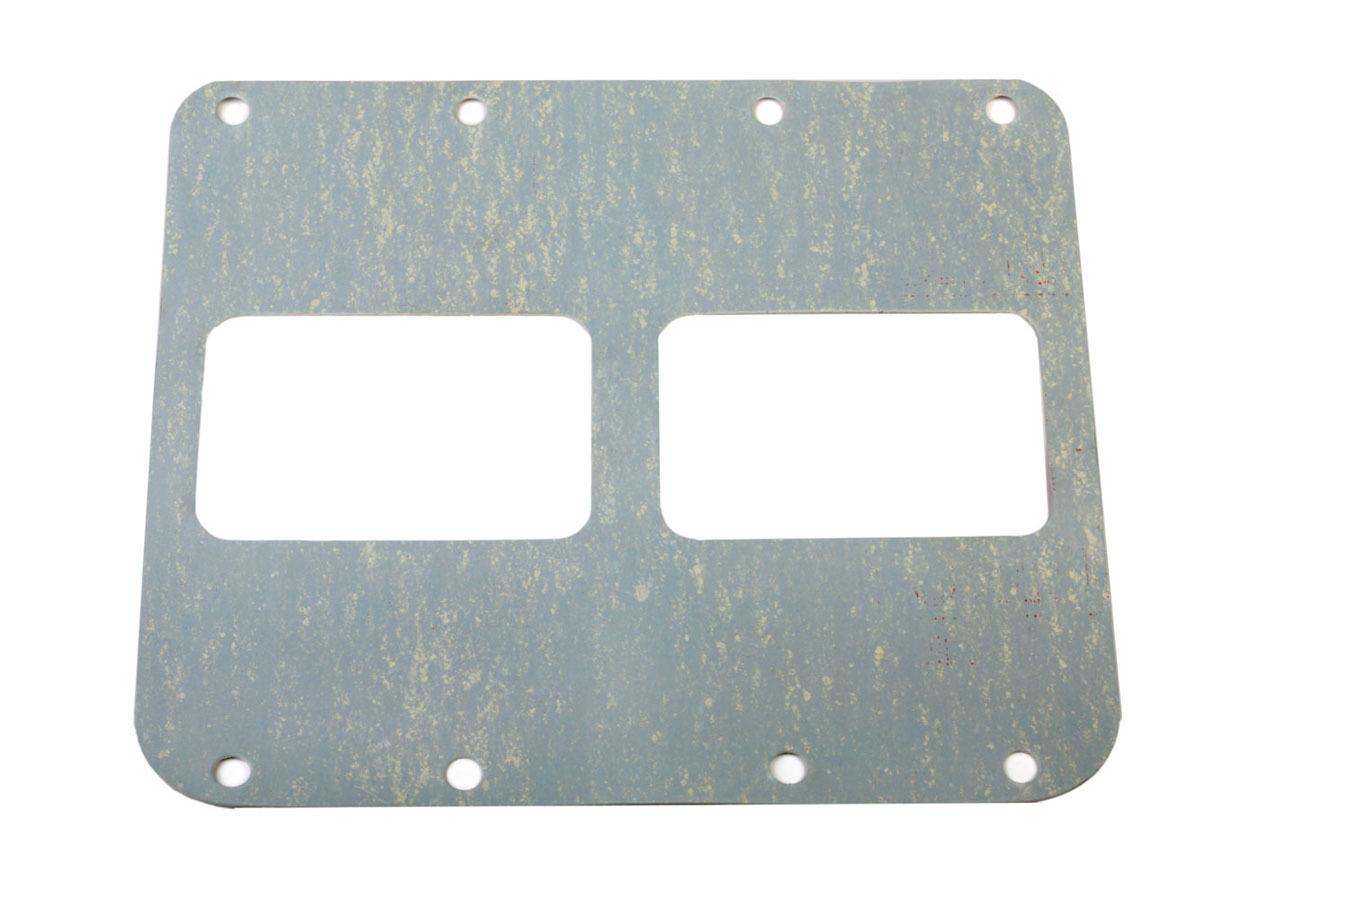 Weiand 7077 - Supercharger Gasket, Base, Composite, 6-71 / 8-71 Supercharger, Each